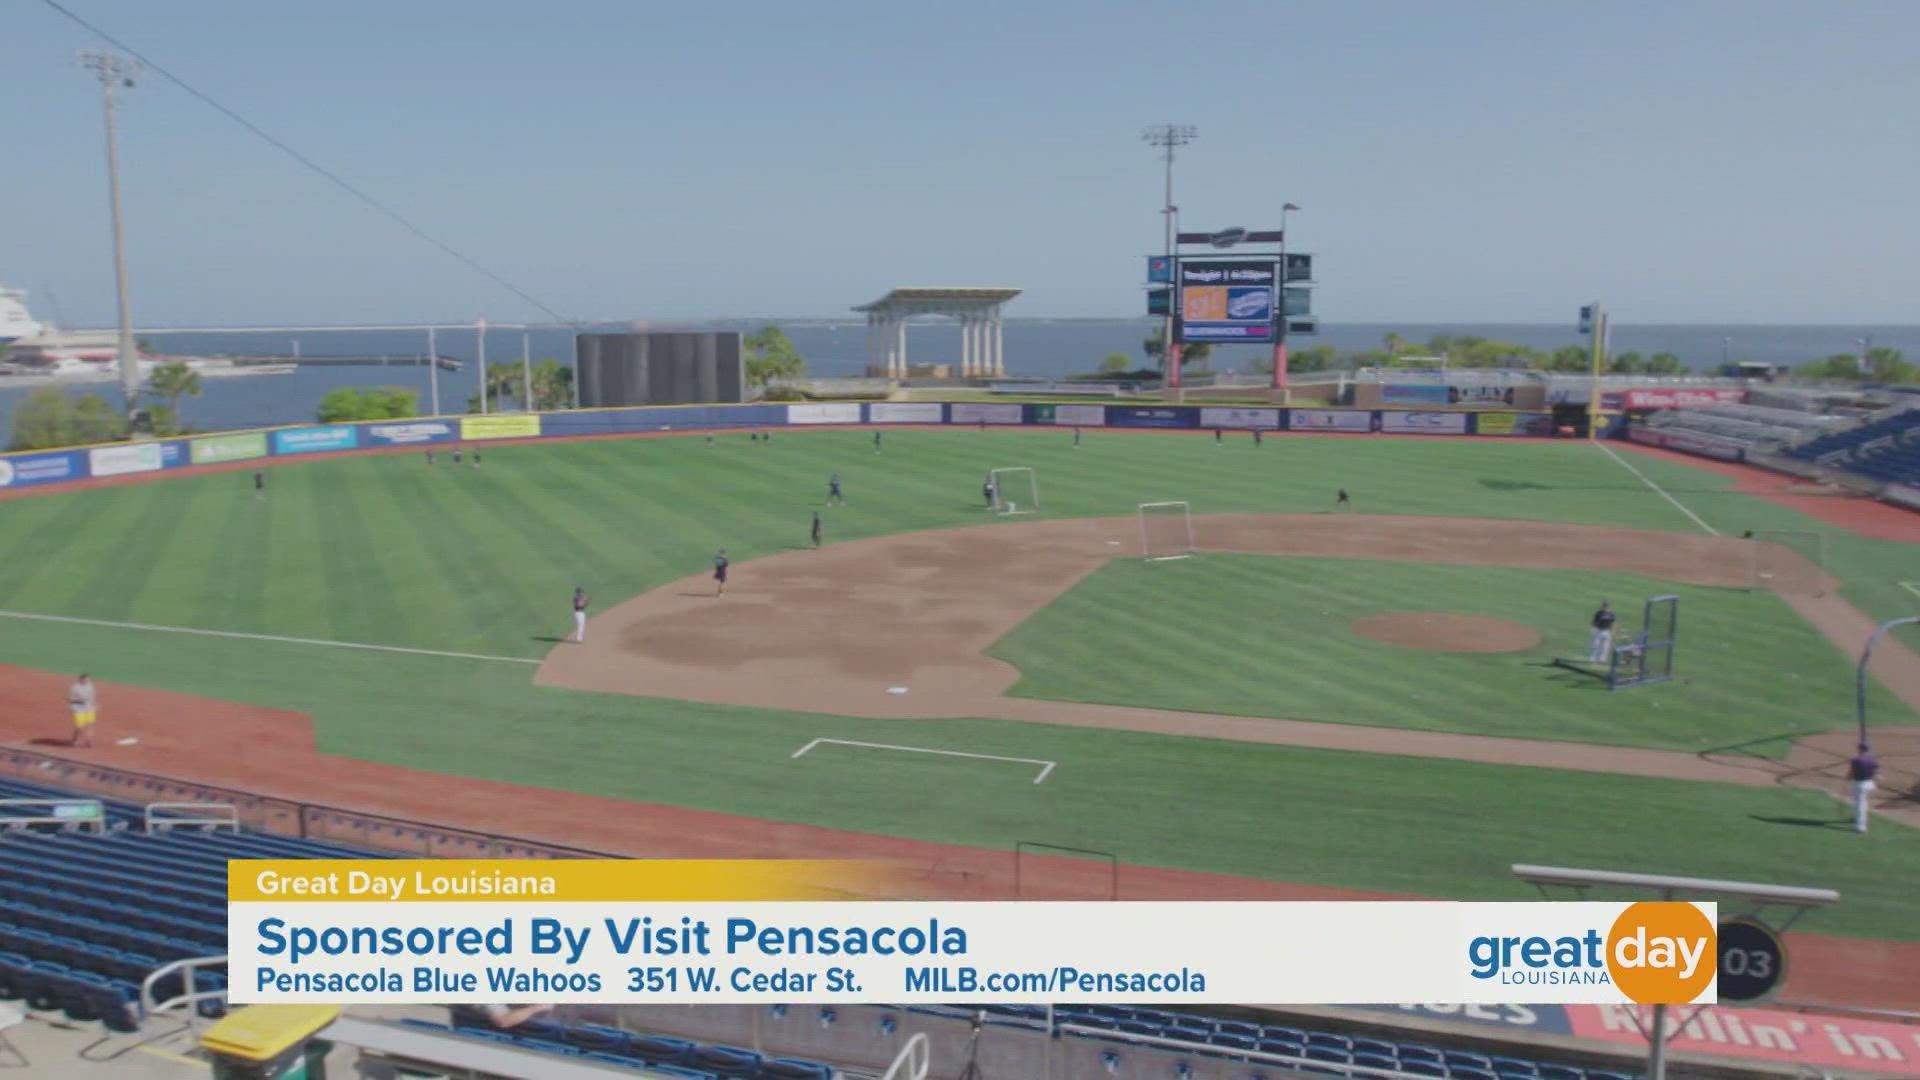 The Blue Wahoos show us the beautiful view, the delicious food, and all the fun they offer to baseball fans.